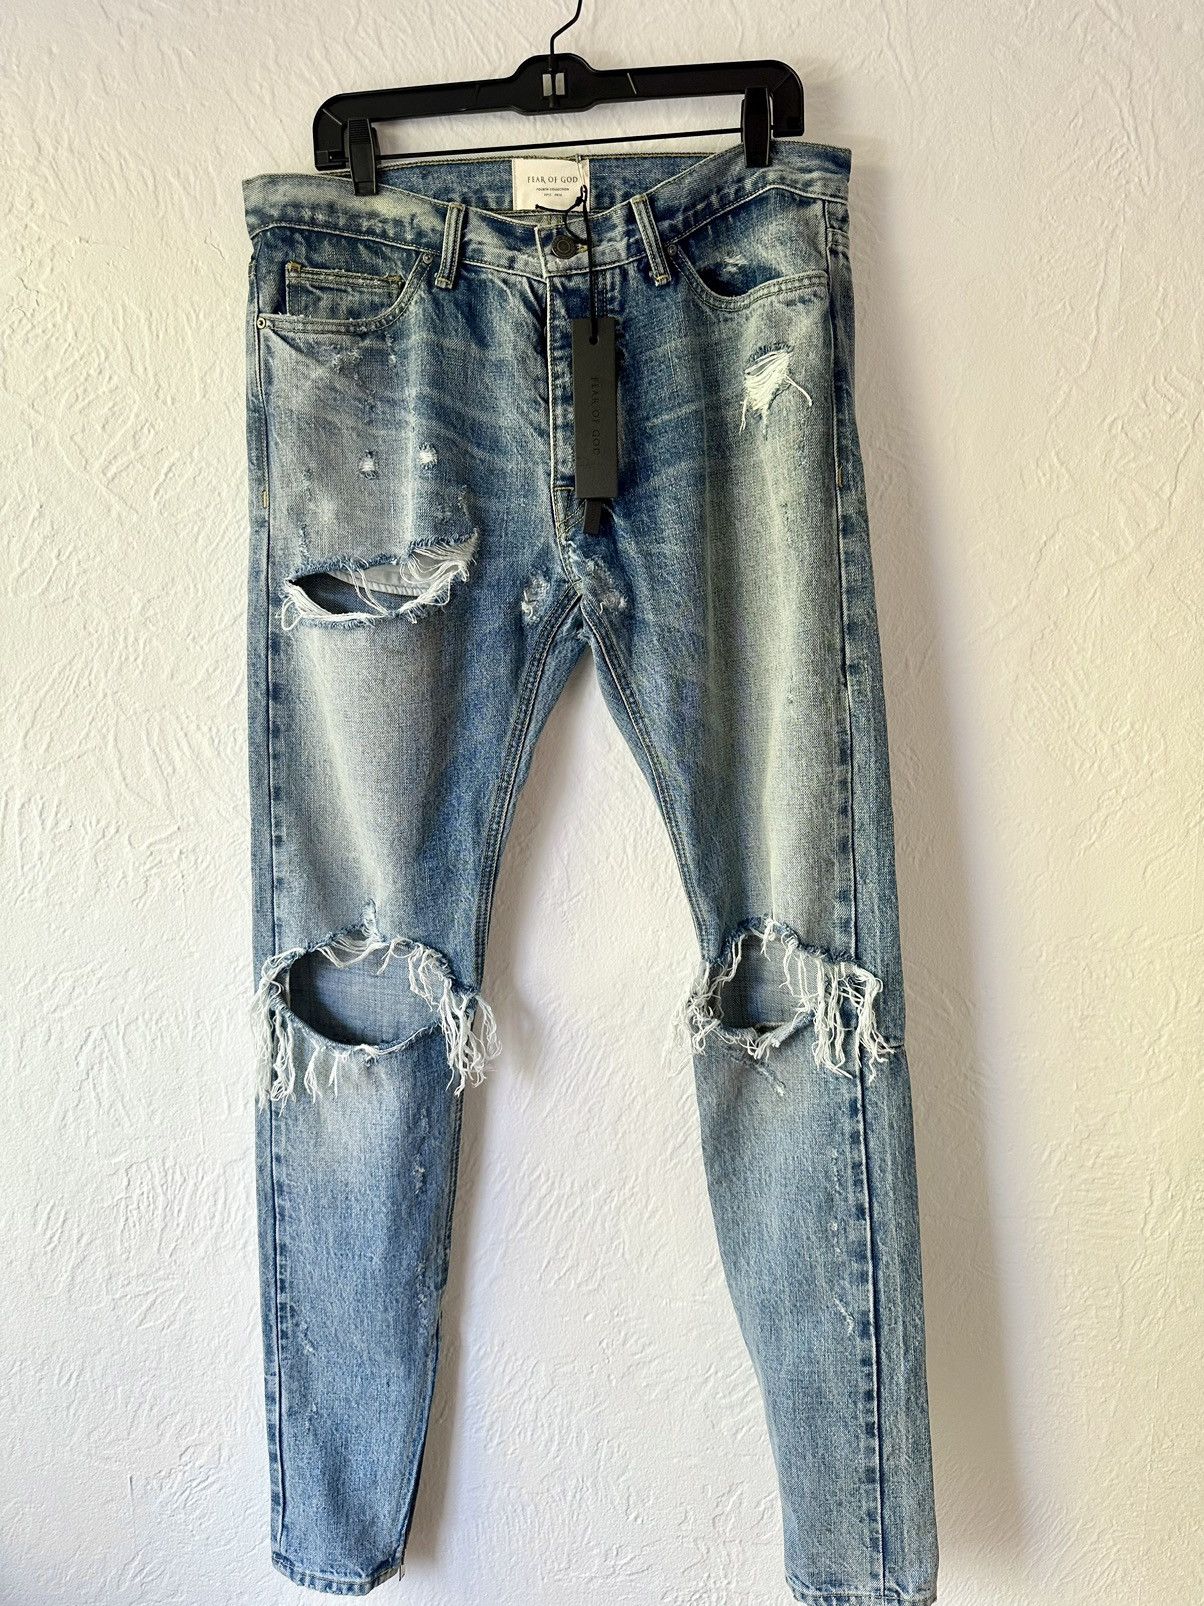 Fear of God Fear of God 4th Collection 2nd Batch Selvedge Denim Size 33 |  Grailed